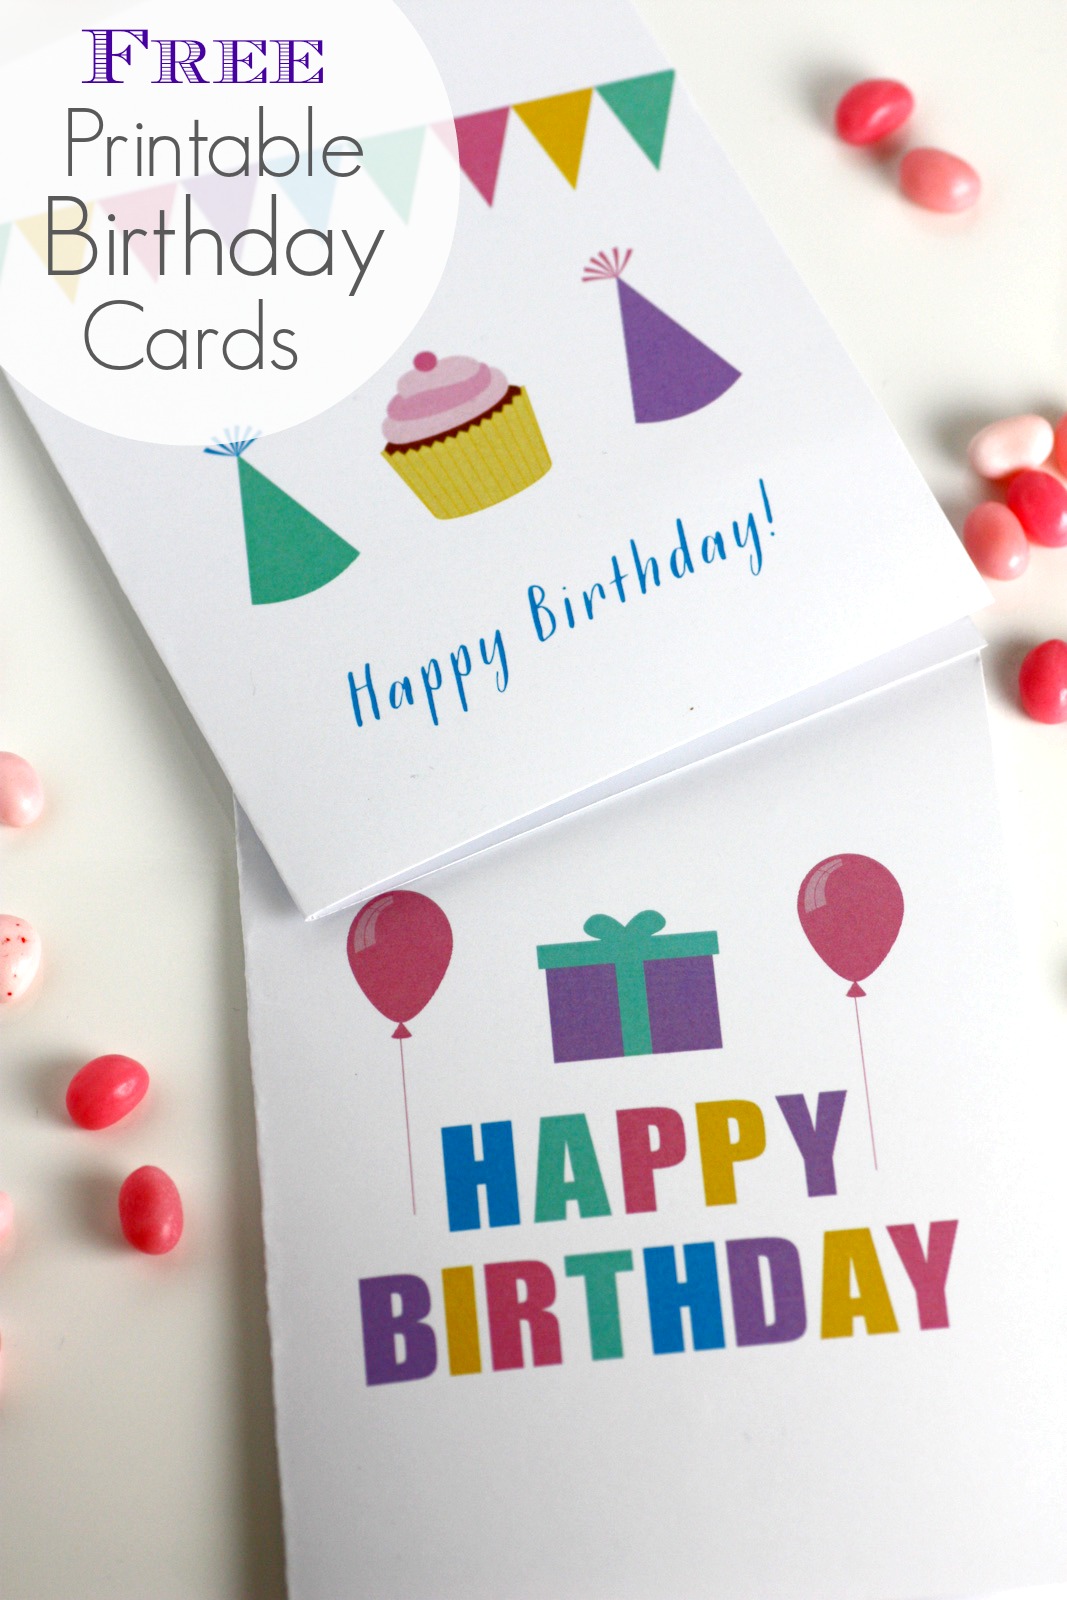 birthday-printable-images-gallery-category-page-4-printablee